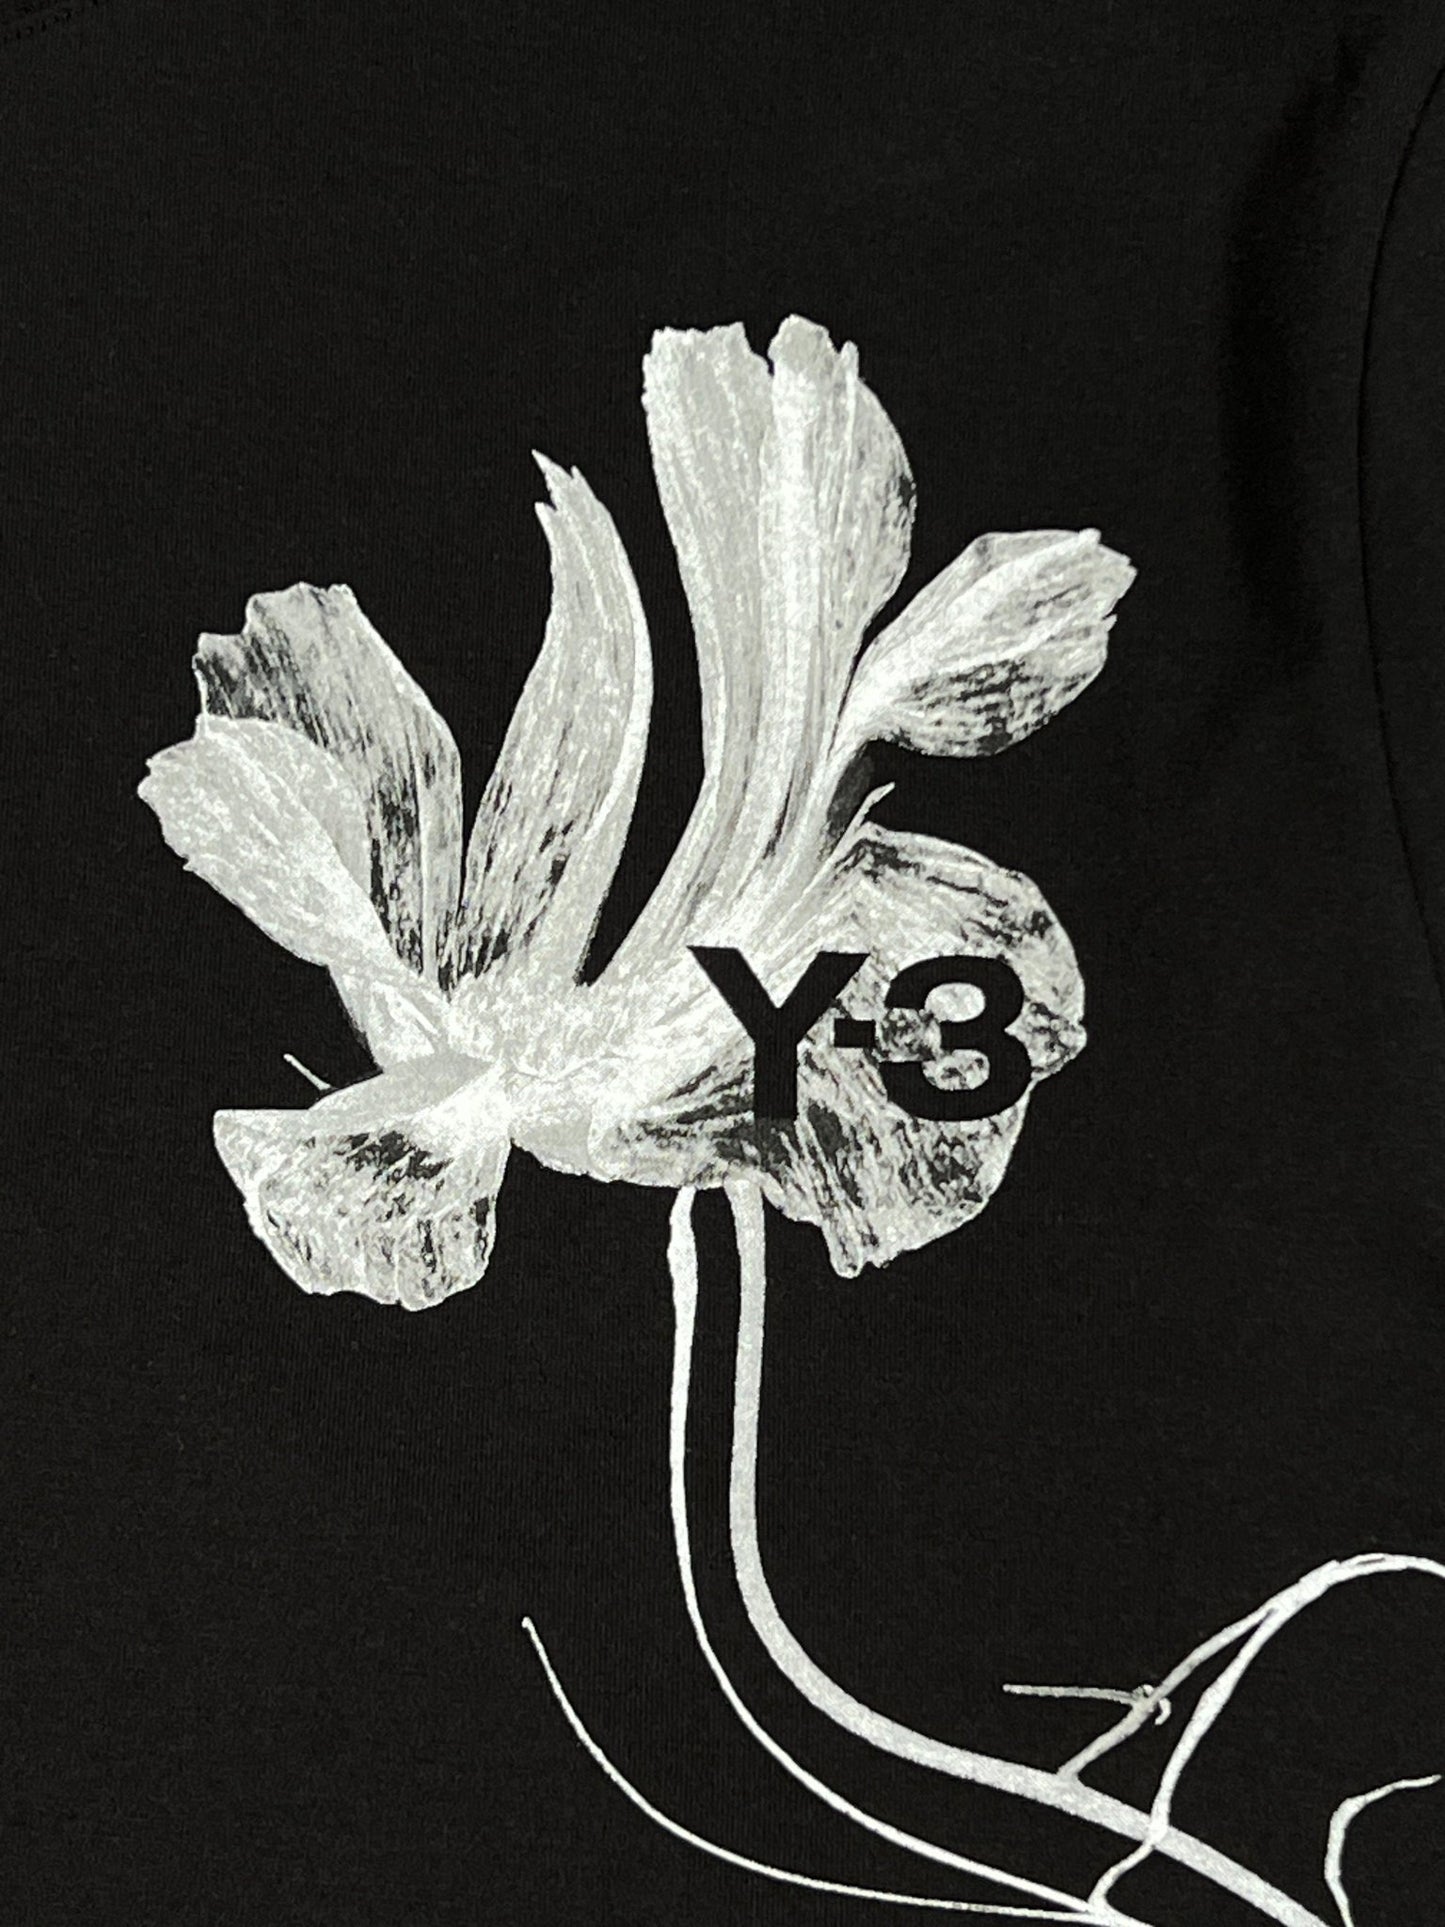 A Y-3 LONG SLEEVE T-SHIRT IN4351 GFX LS TEE BLACK with a white flower on it.